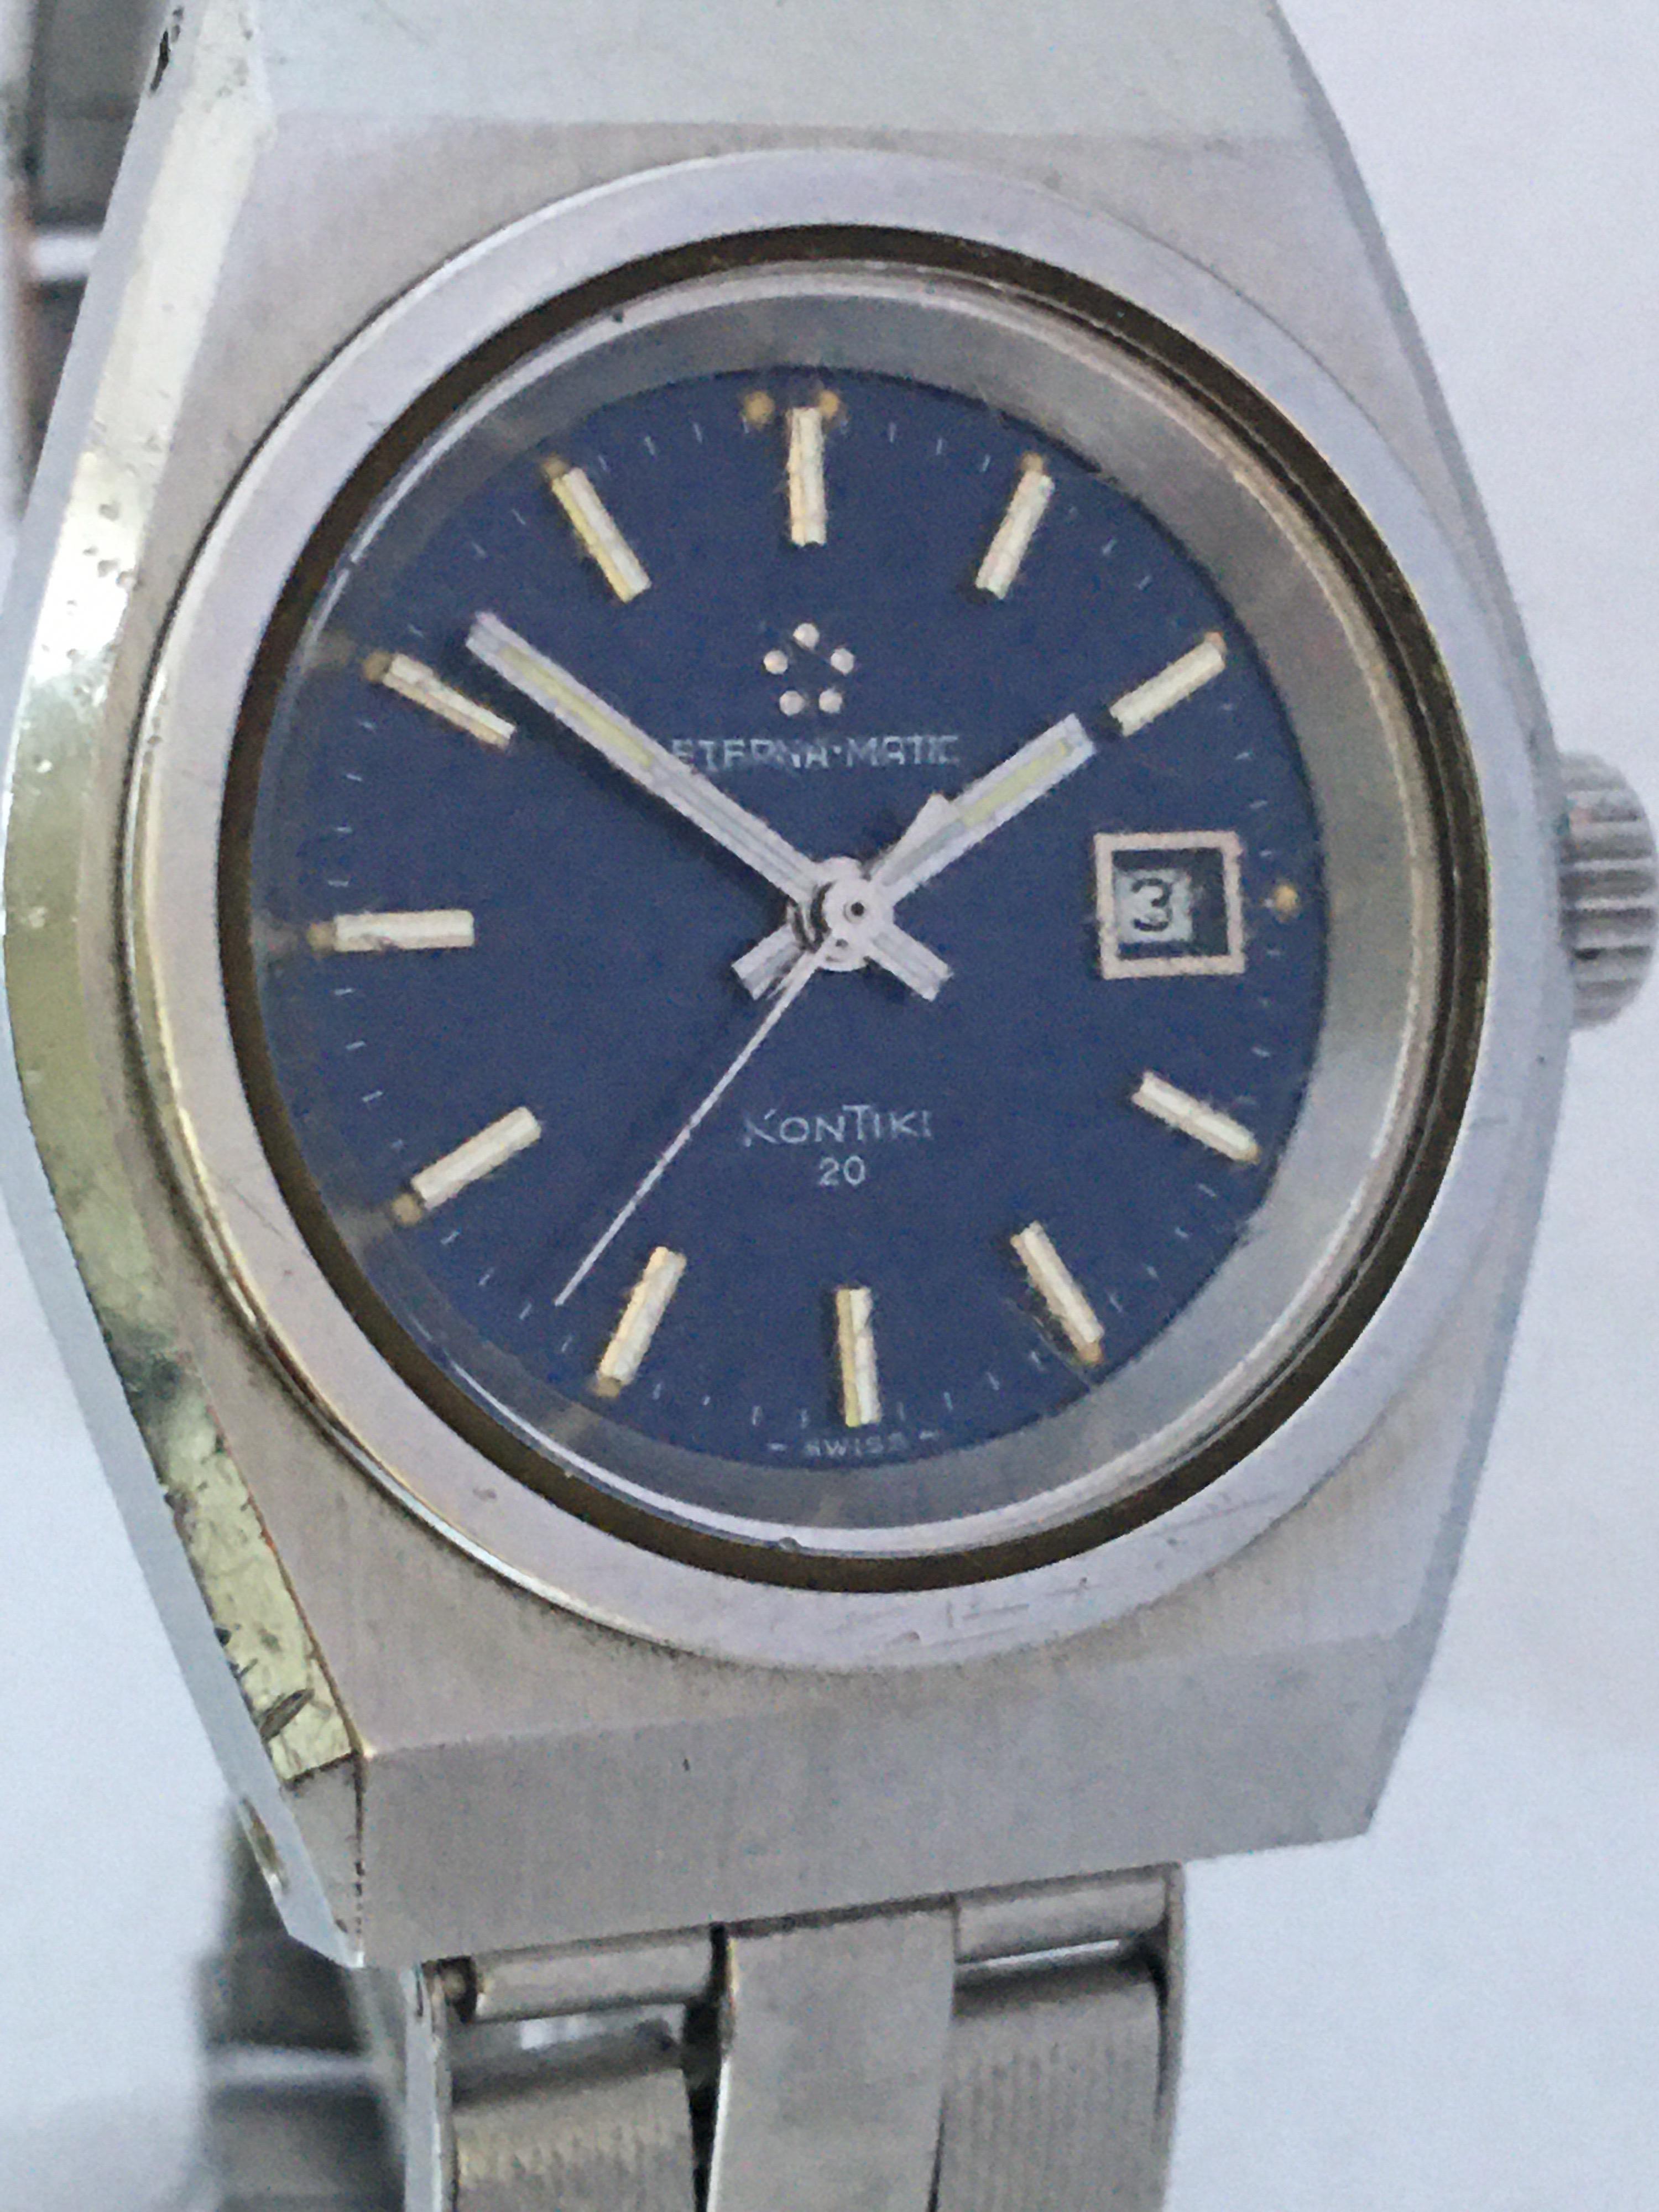 This beautiful pre-owned automatic Eterna-matic Watch is working and it is running well. excellent time keeping. Visible signs of ageing and wear with small scratches on the glass and watch case as shown.

Please study the images carefully as form